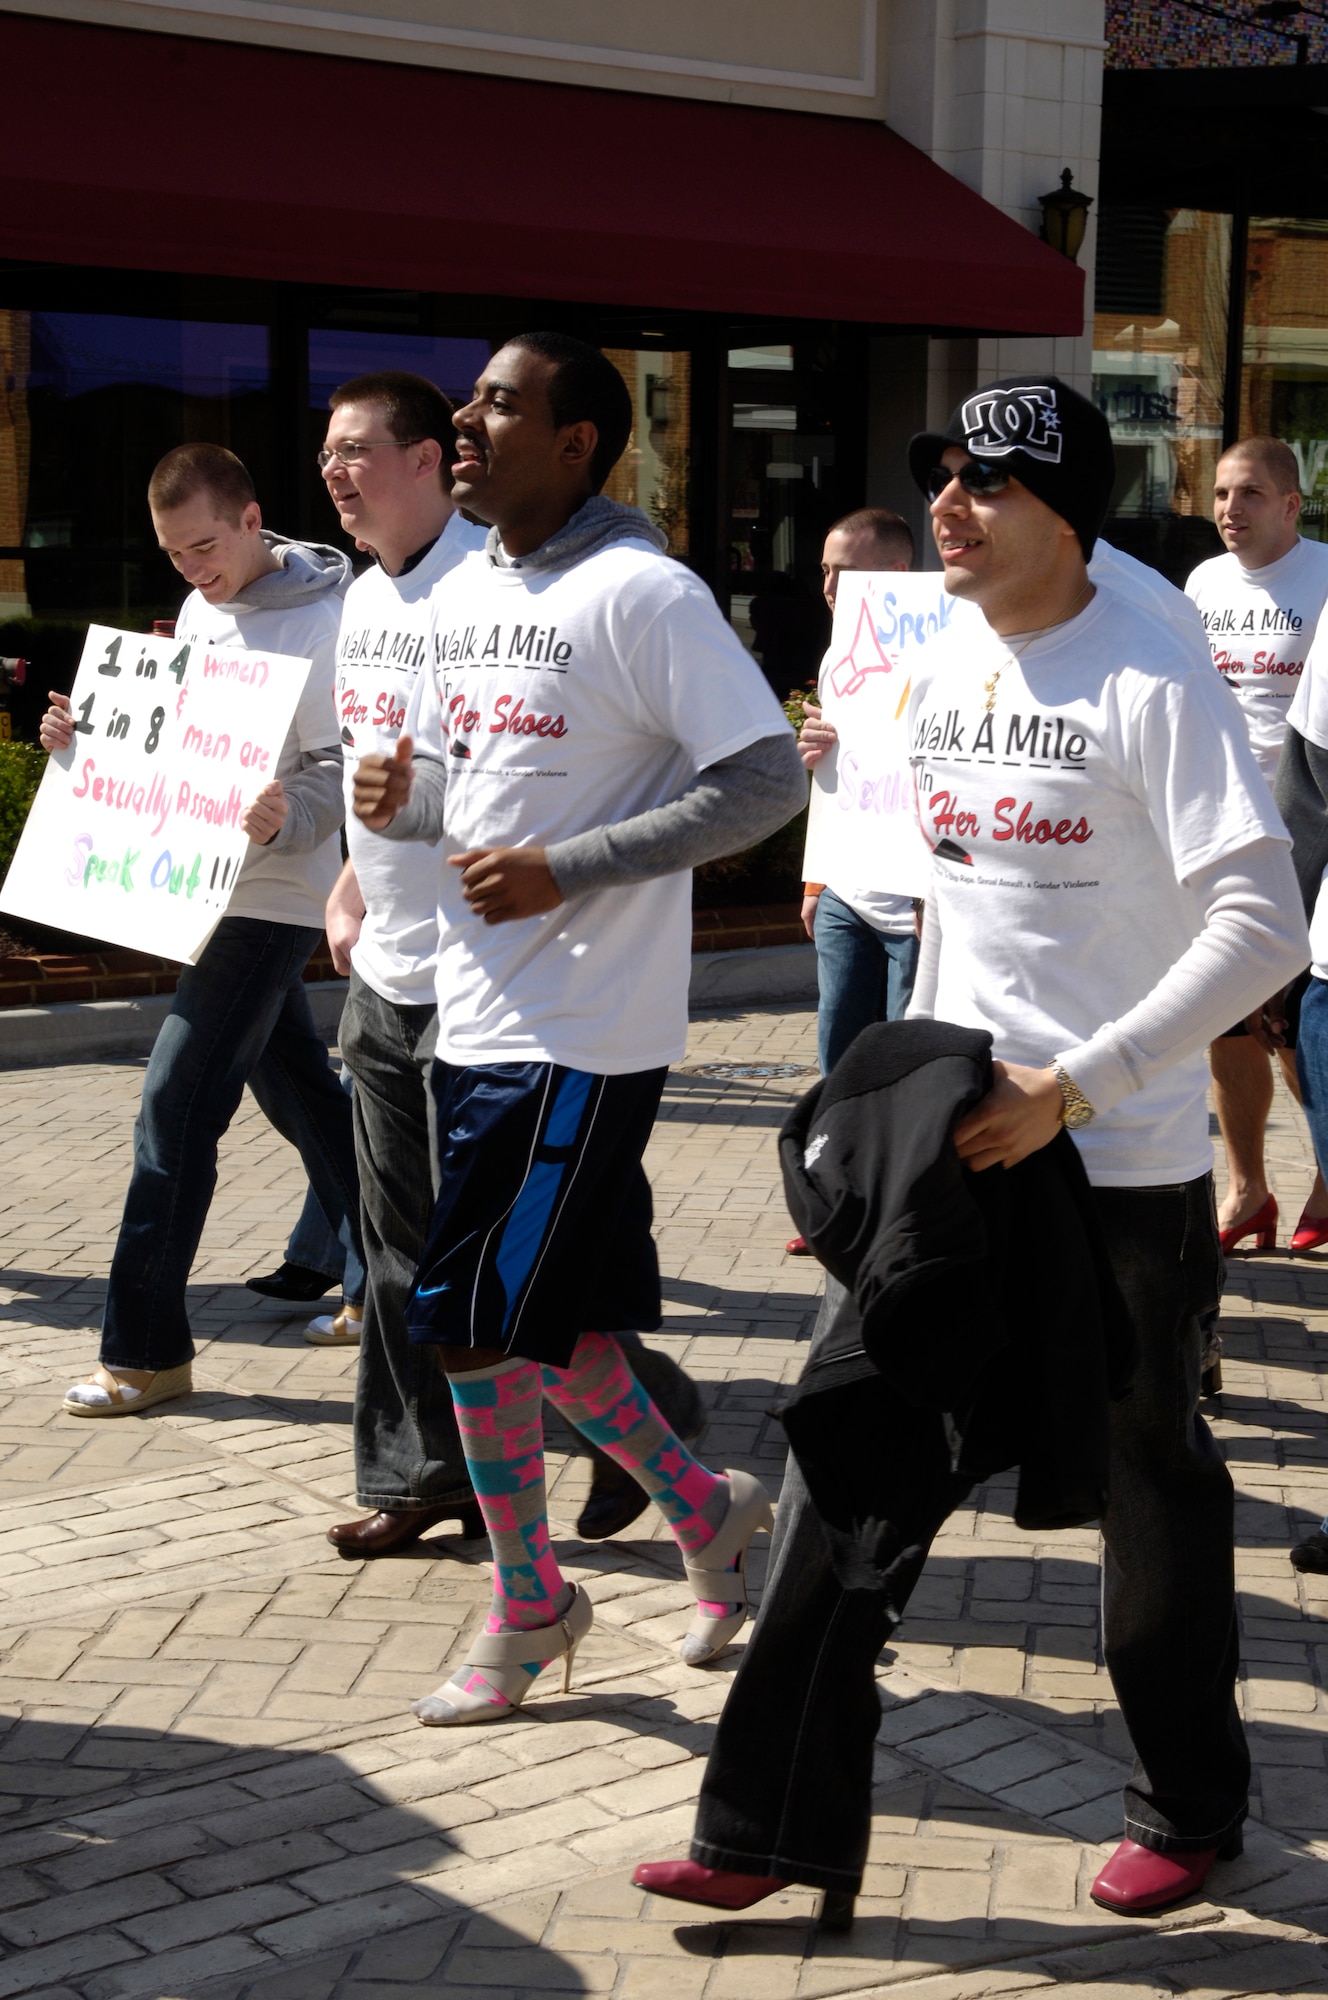 Members of the 633d Communications Squadron participate in the Walk A Mile In Her Shoes event in Hampton, Va., April 2, 2011. The march is a “fun way for men to show their support in the fight to end sexual violence” and is held worldwide annually during Sexual Assault Awareness month.  (U.S. Air Force photo by Airman 1st Class Camilla Elizeu/Released)